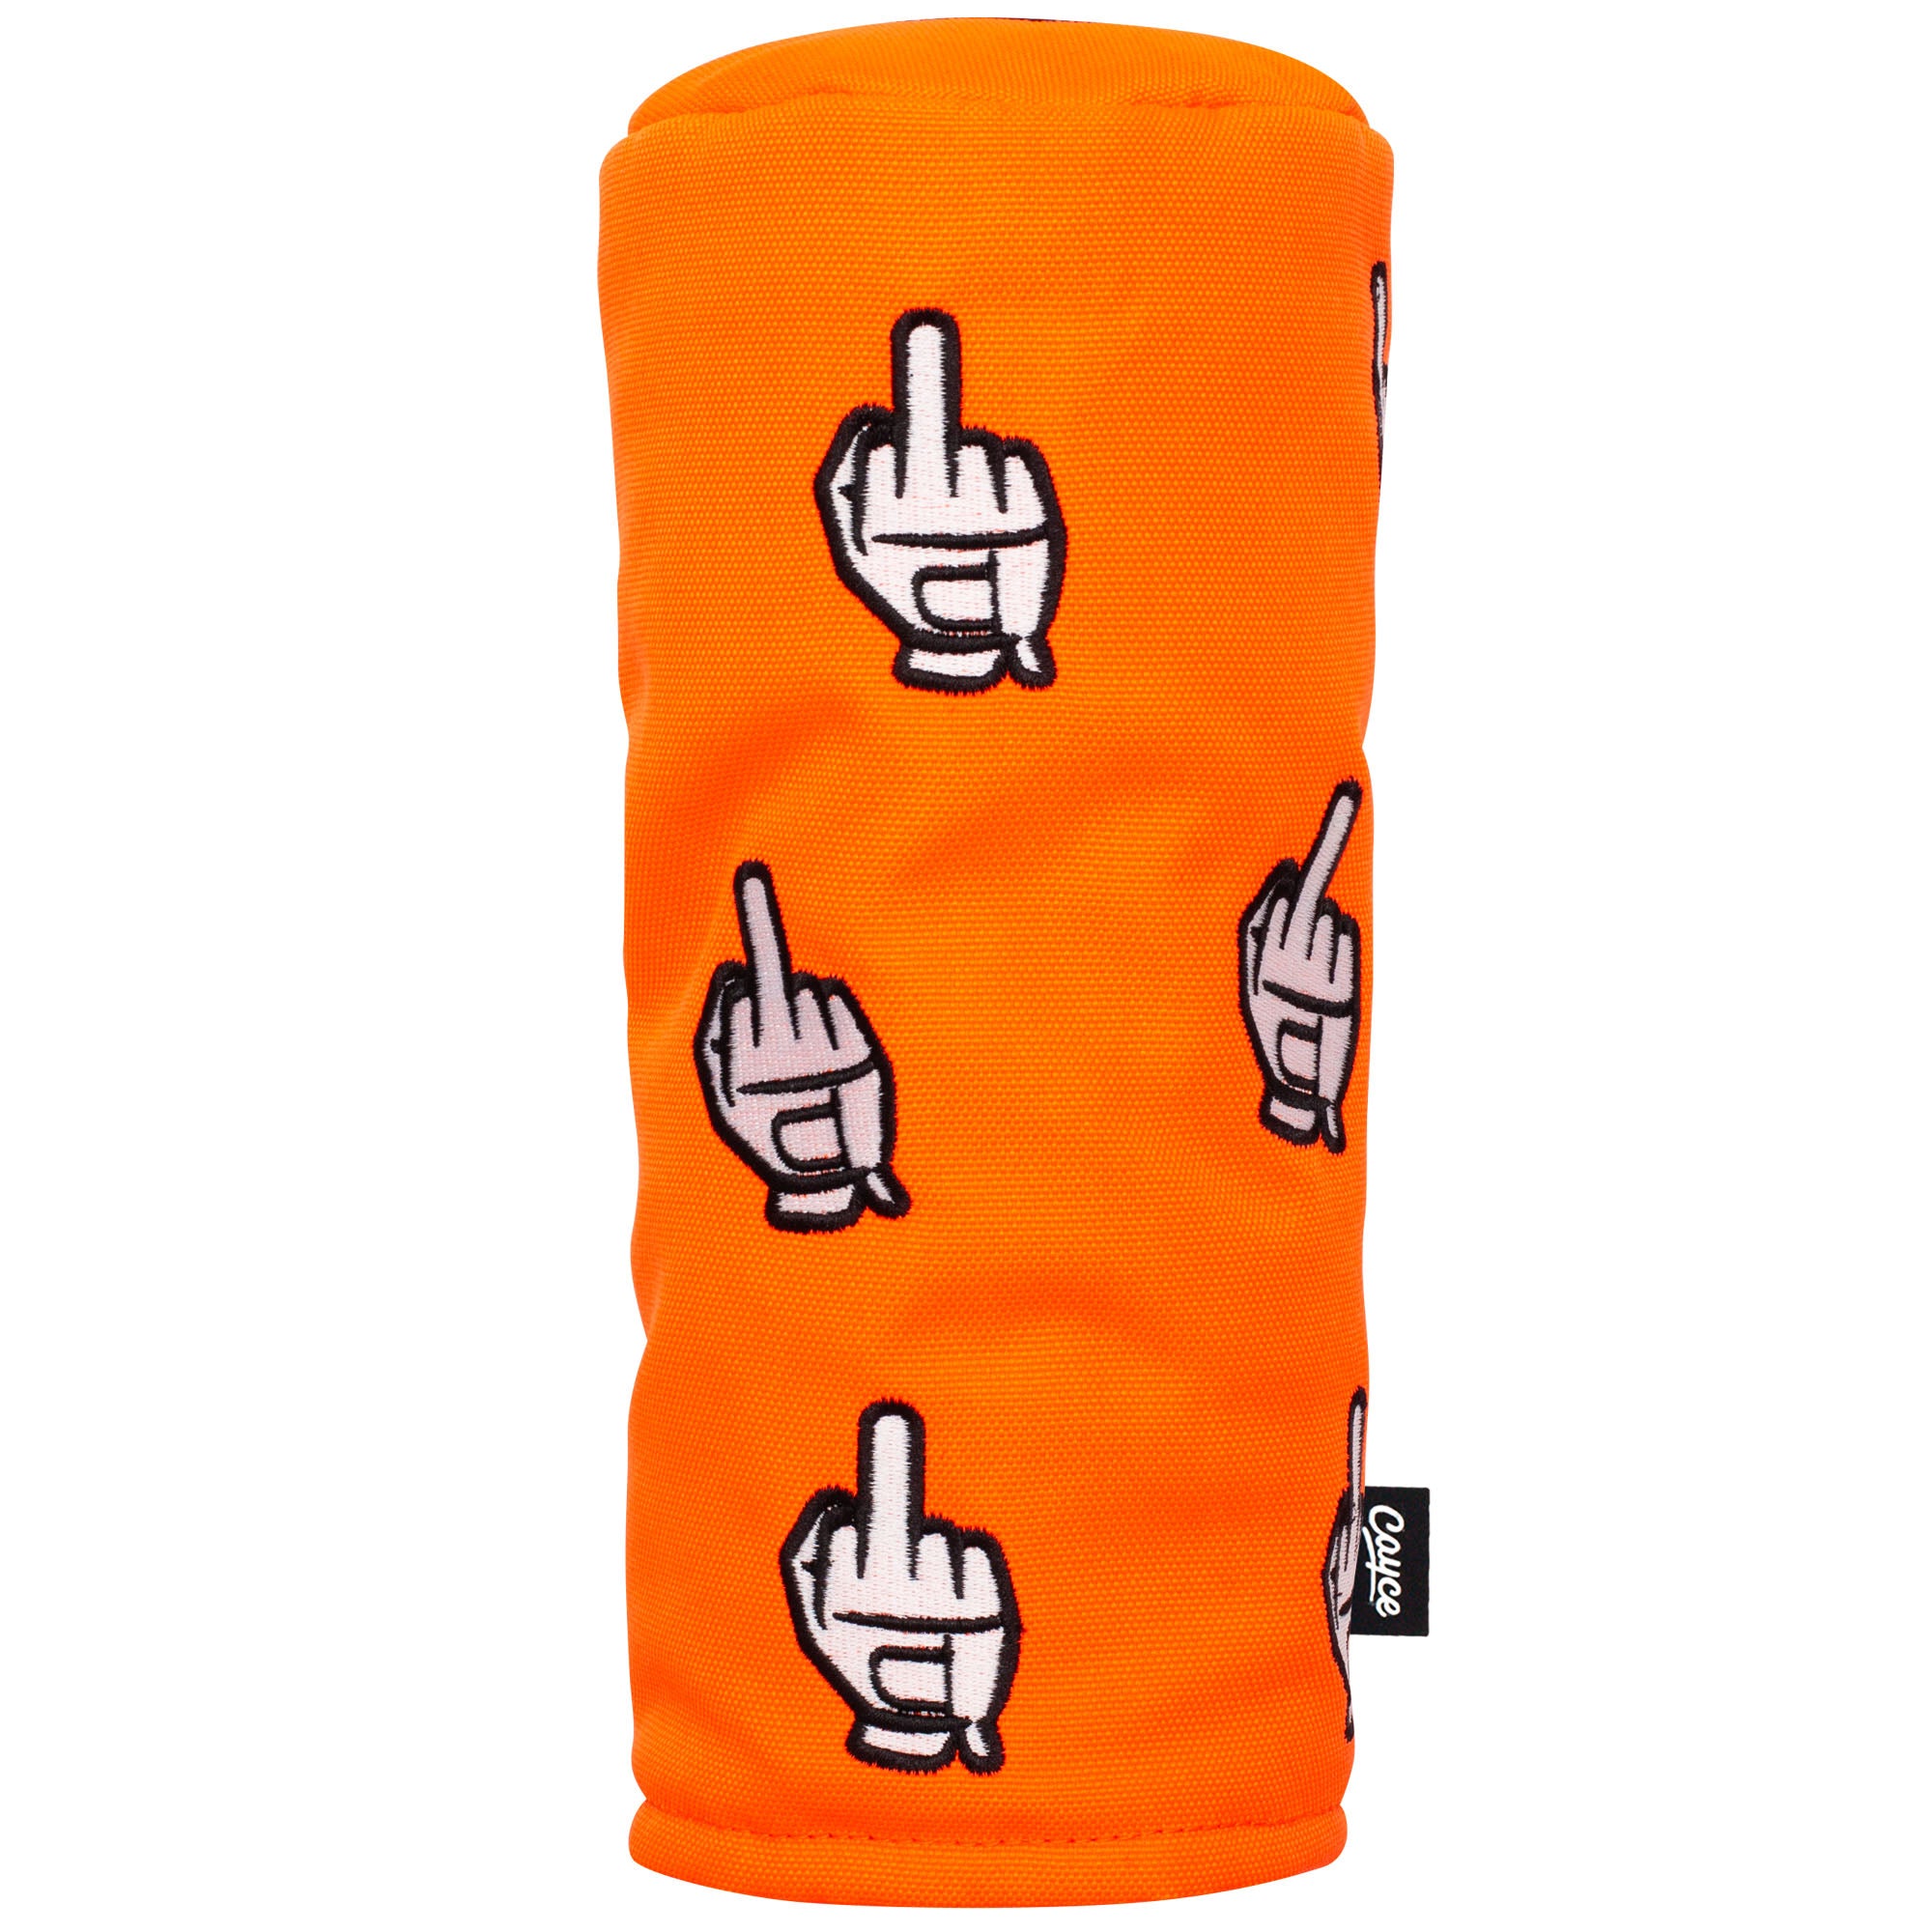 A fluorescent orange, barrel-shaped golf head cover with an embroidered middle finger in a golf glove pattern. 